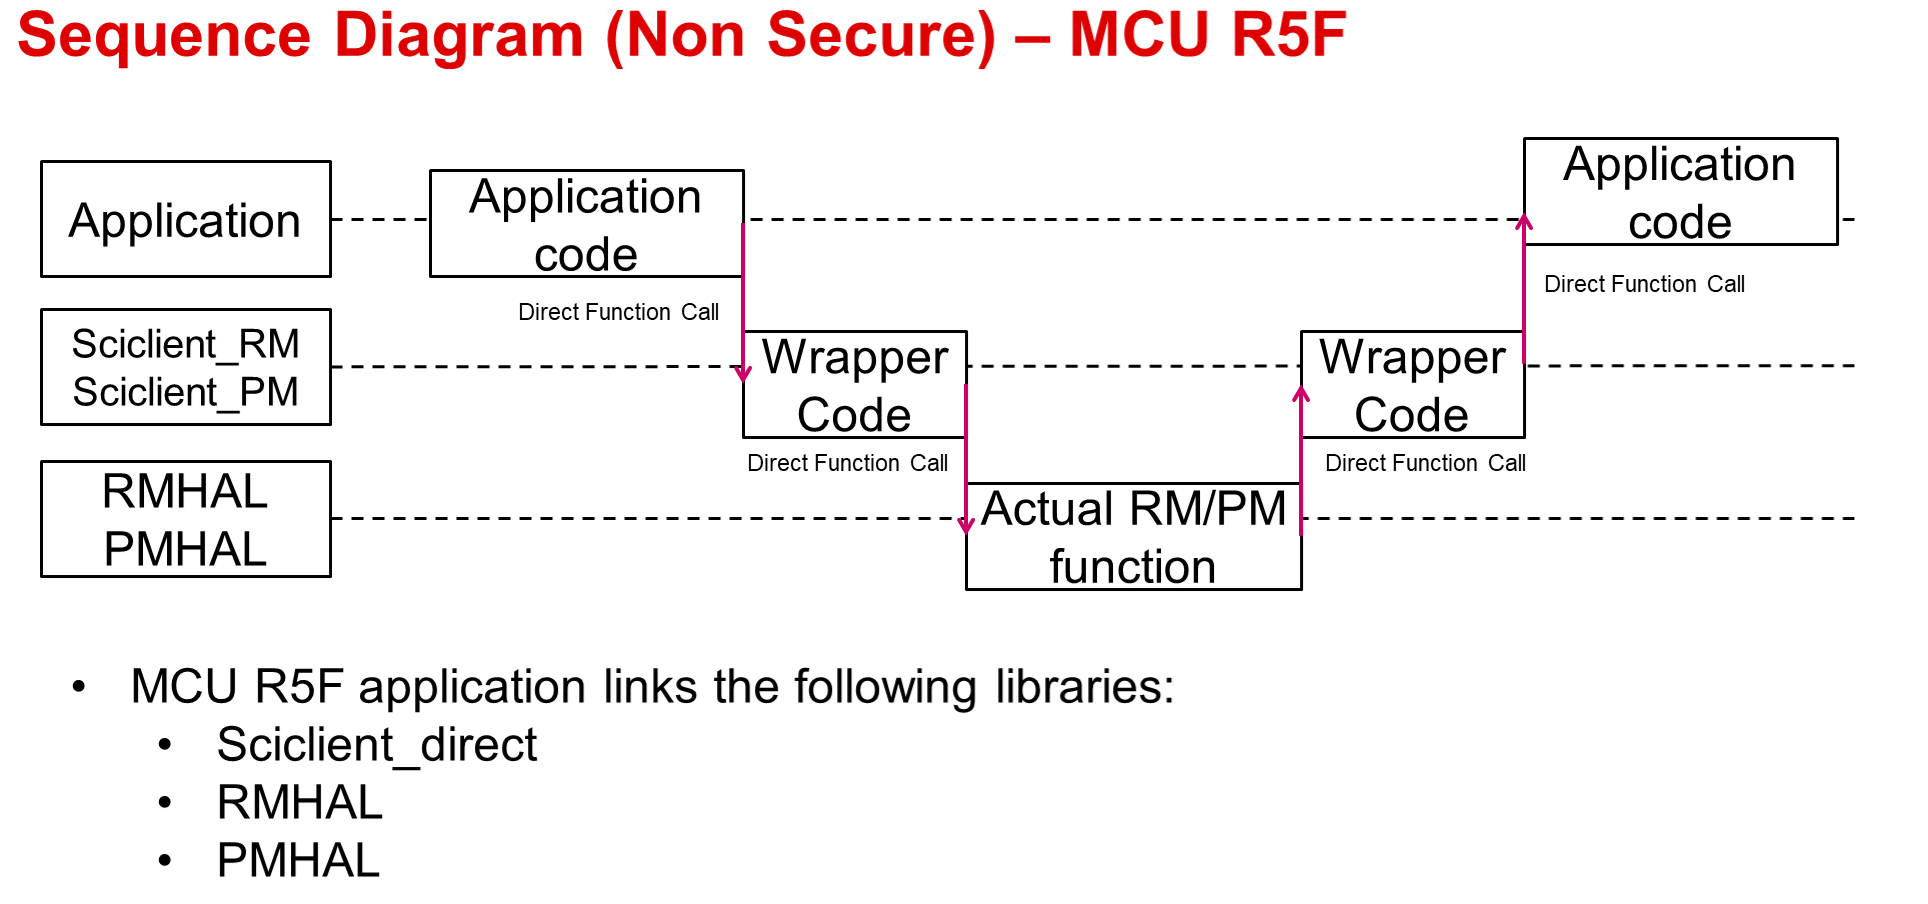 ../../_images/SeqDiagram_NonSecure_R5.png